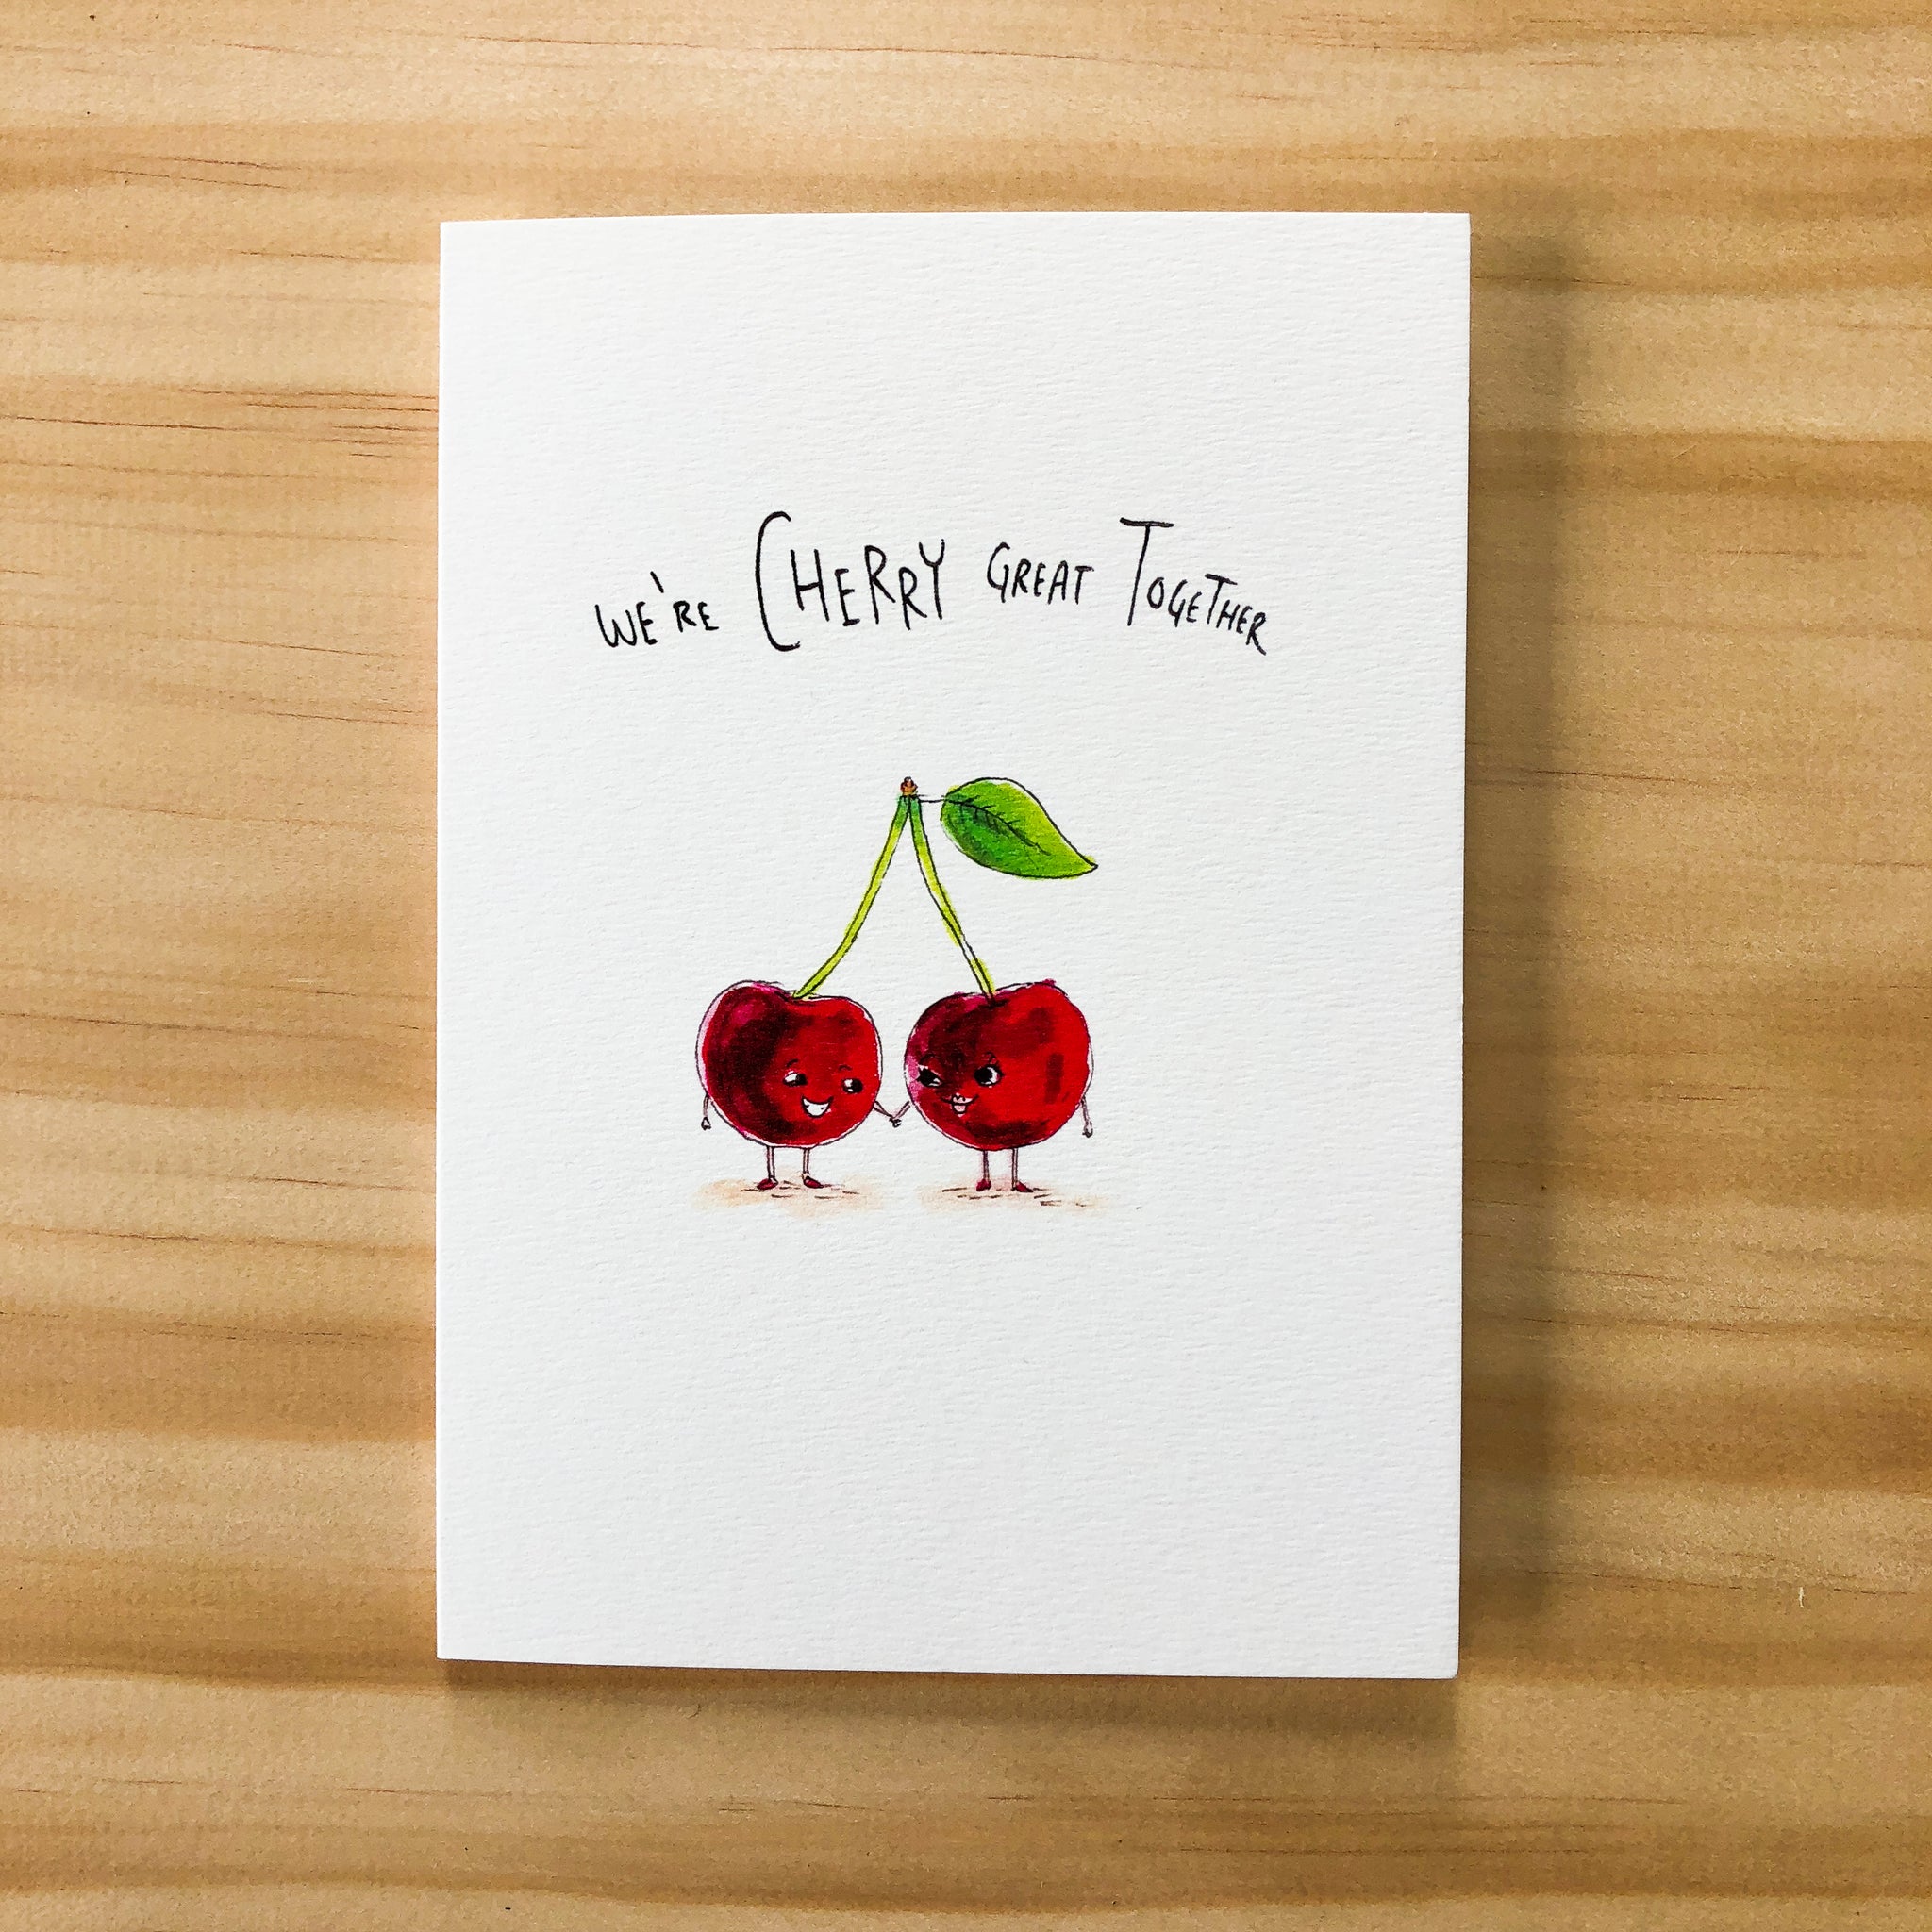 We're Cherry Great Together | hand-made card | Well Drawn cards